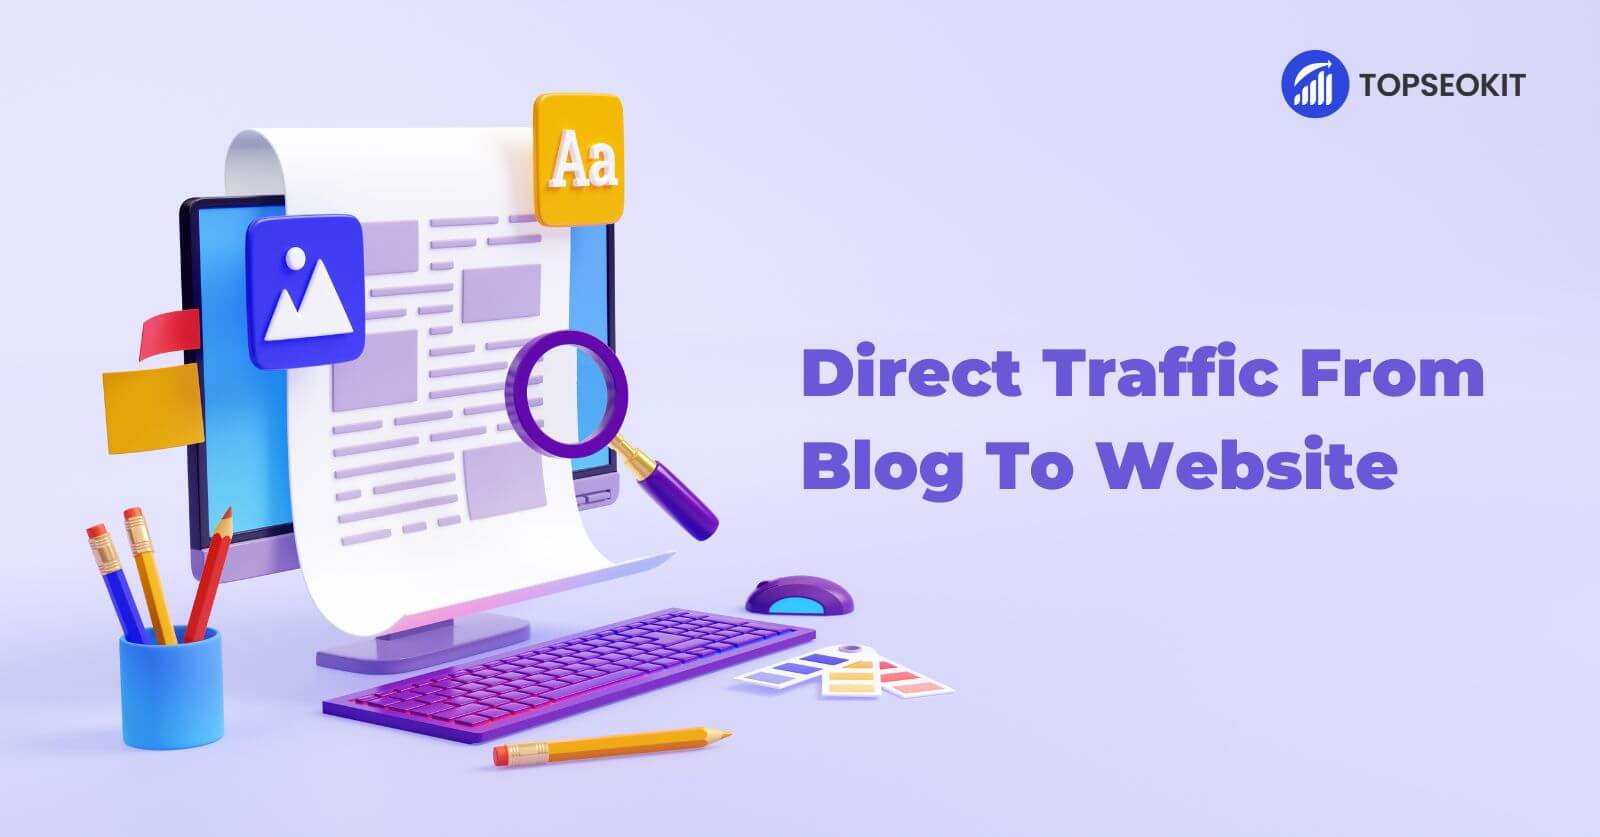 How To Direct Traffic From Blog To Website?